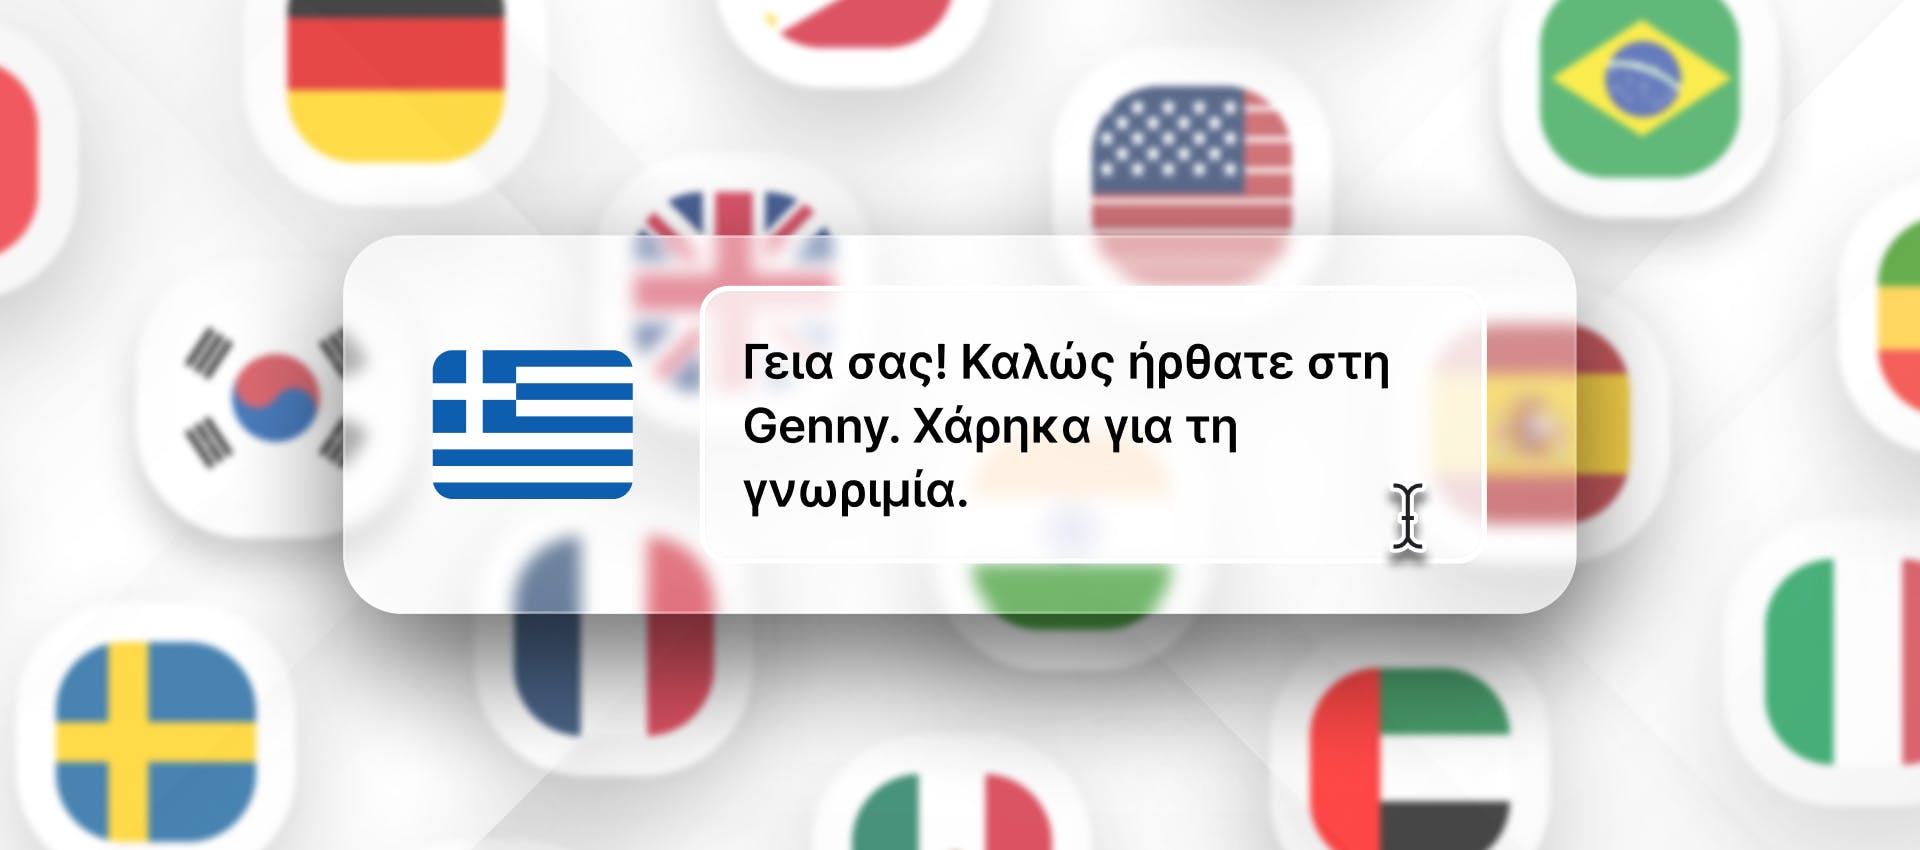 Greek phrase for Greek TTS generation with different flags in the background